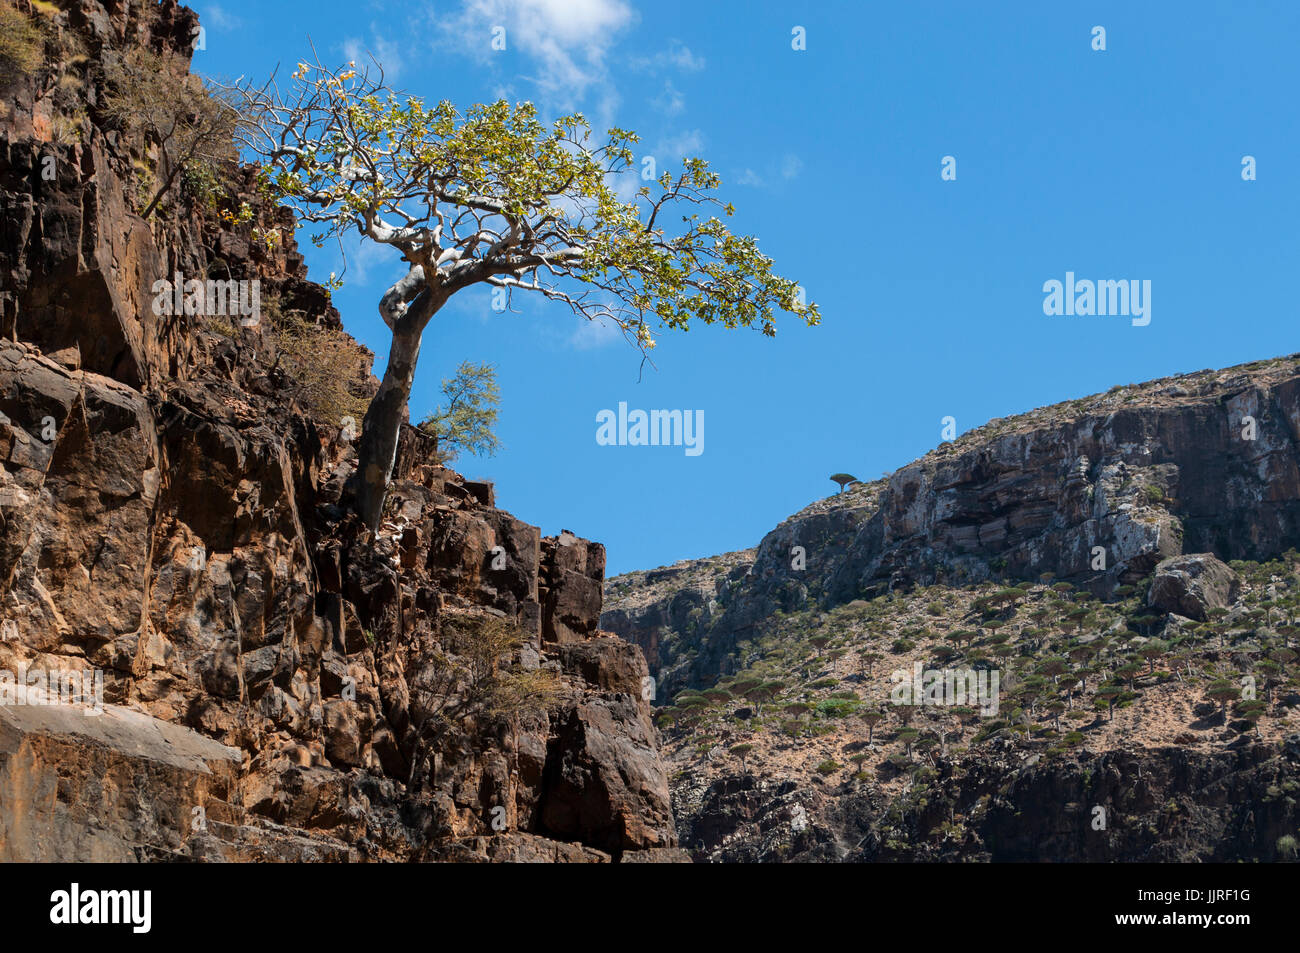 Yemen: a tree on a rock in the oasis of Dirhur in the Dragon Blood trees forest on the island of Socotra, Unesco world heritage site since 2008 Stock Photo